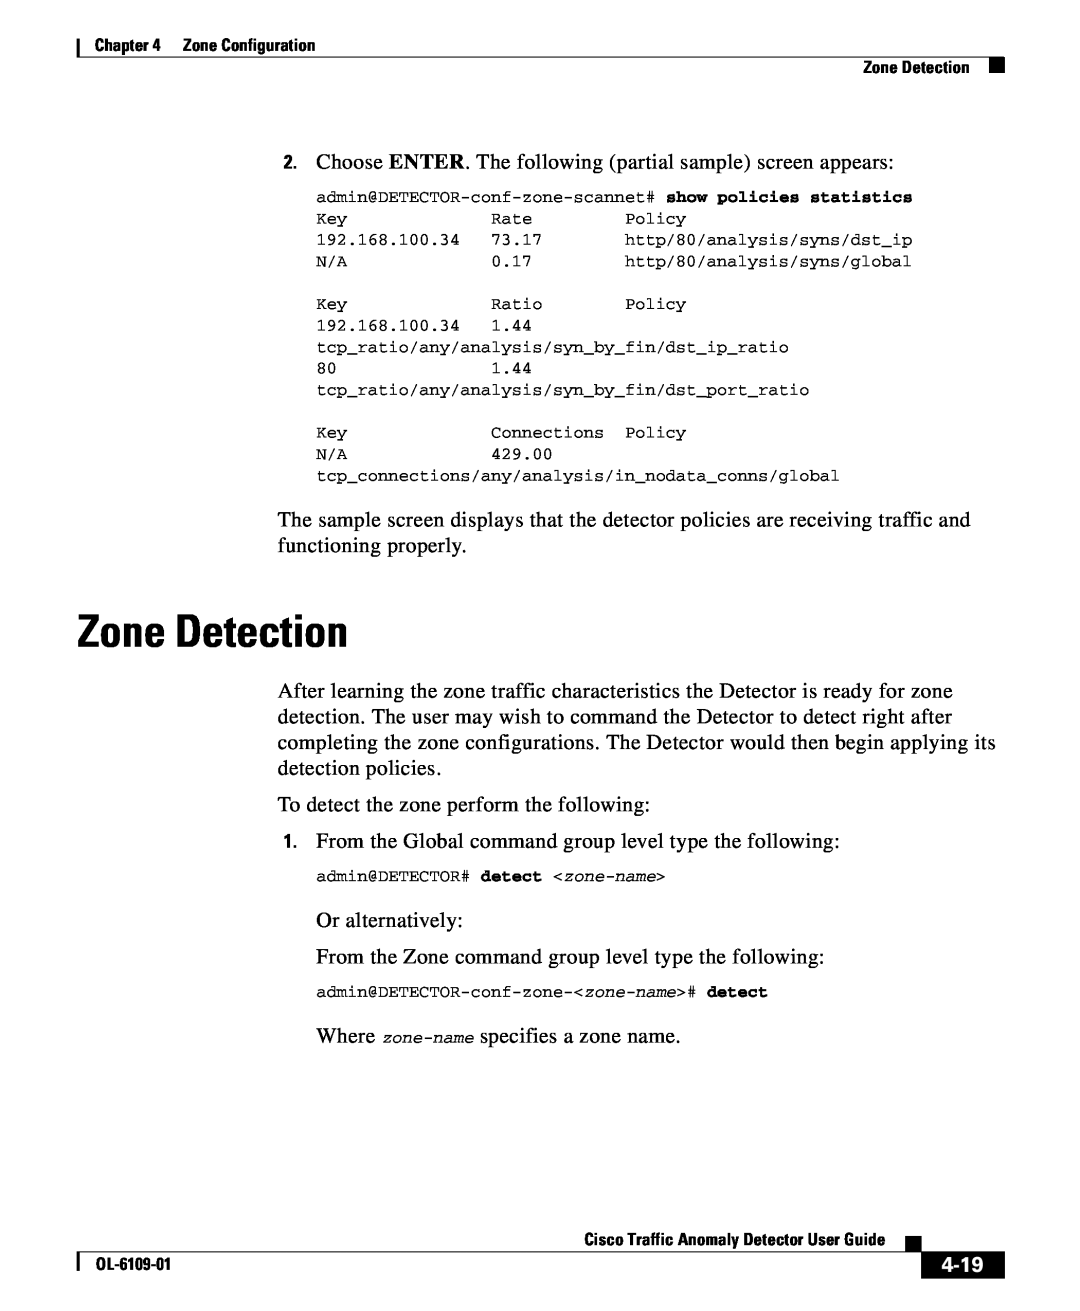 Cisco Systems OL-6109-01 manual Zone Detection, 4-19 